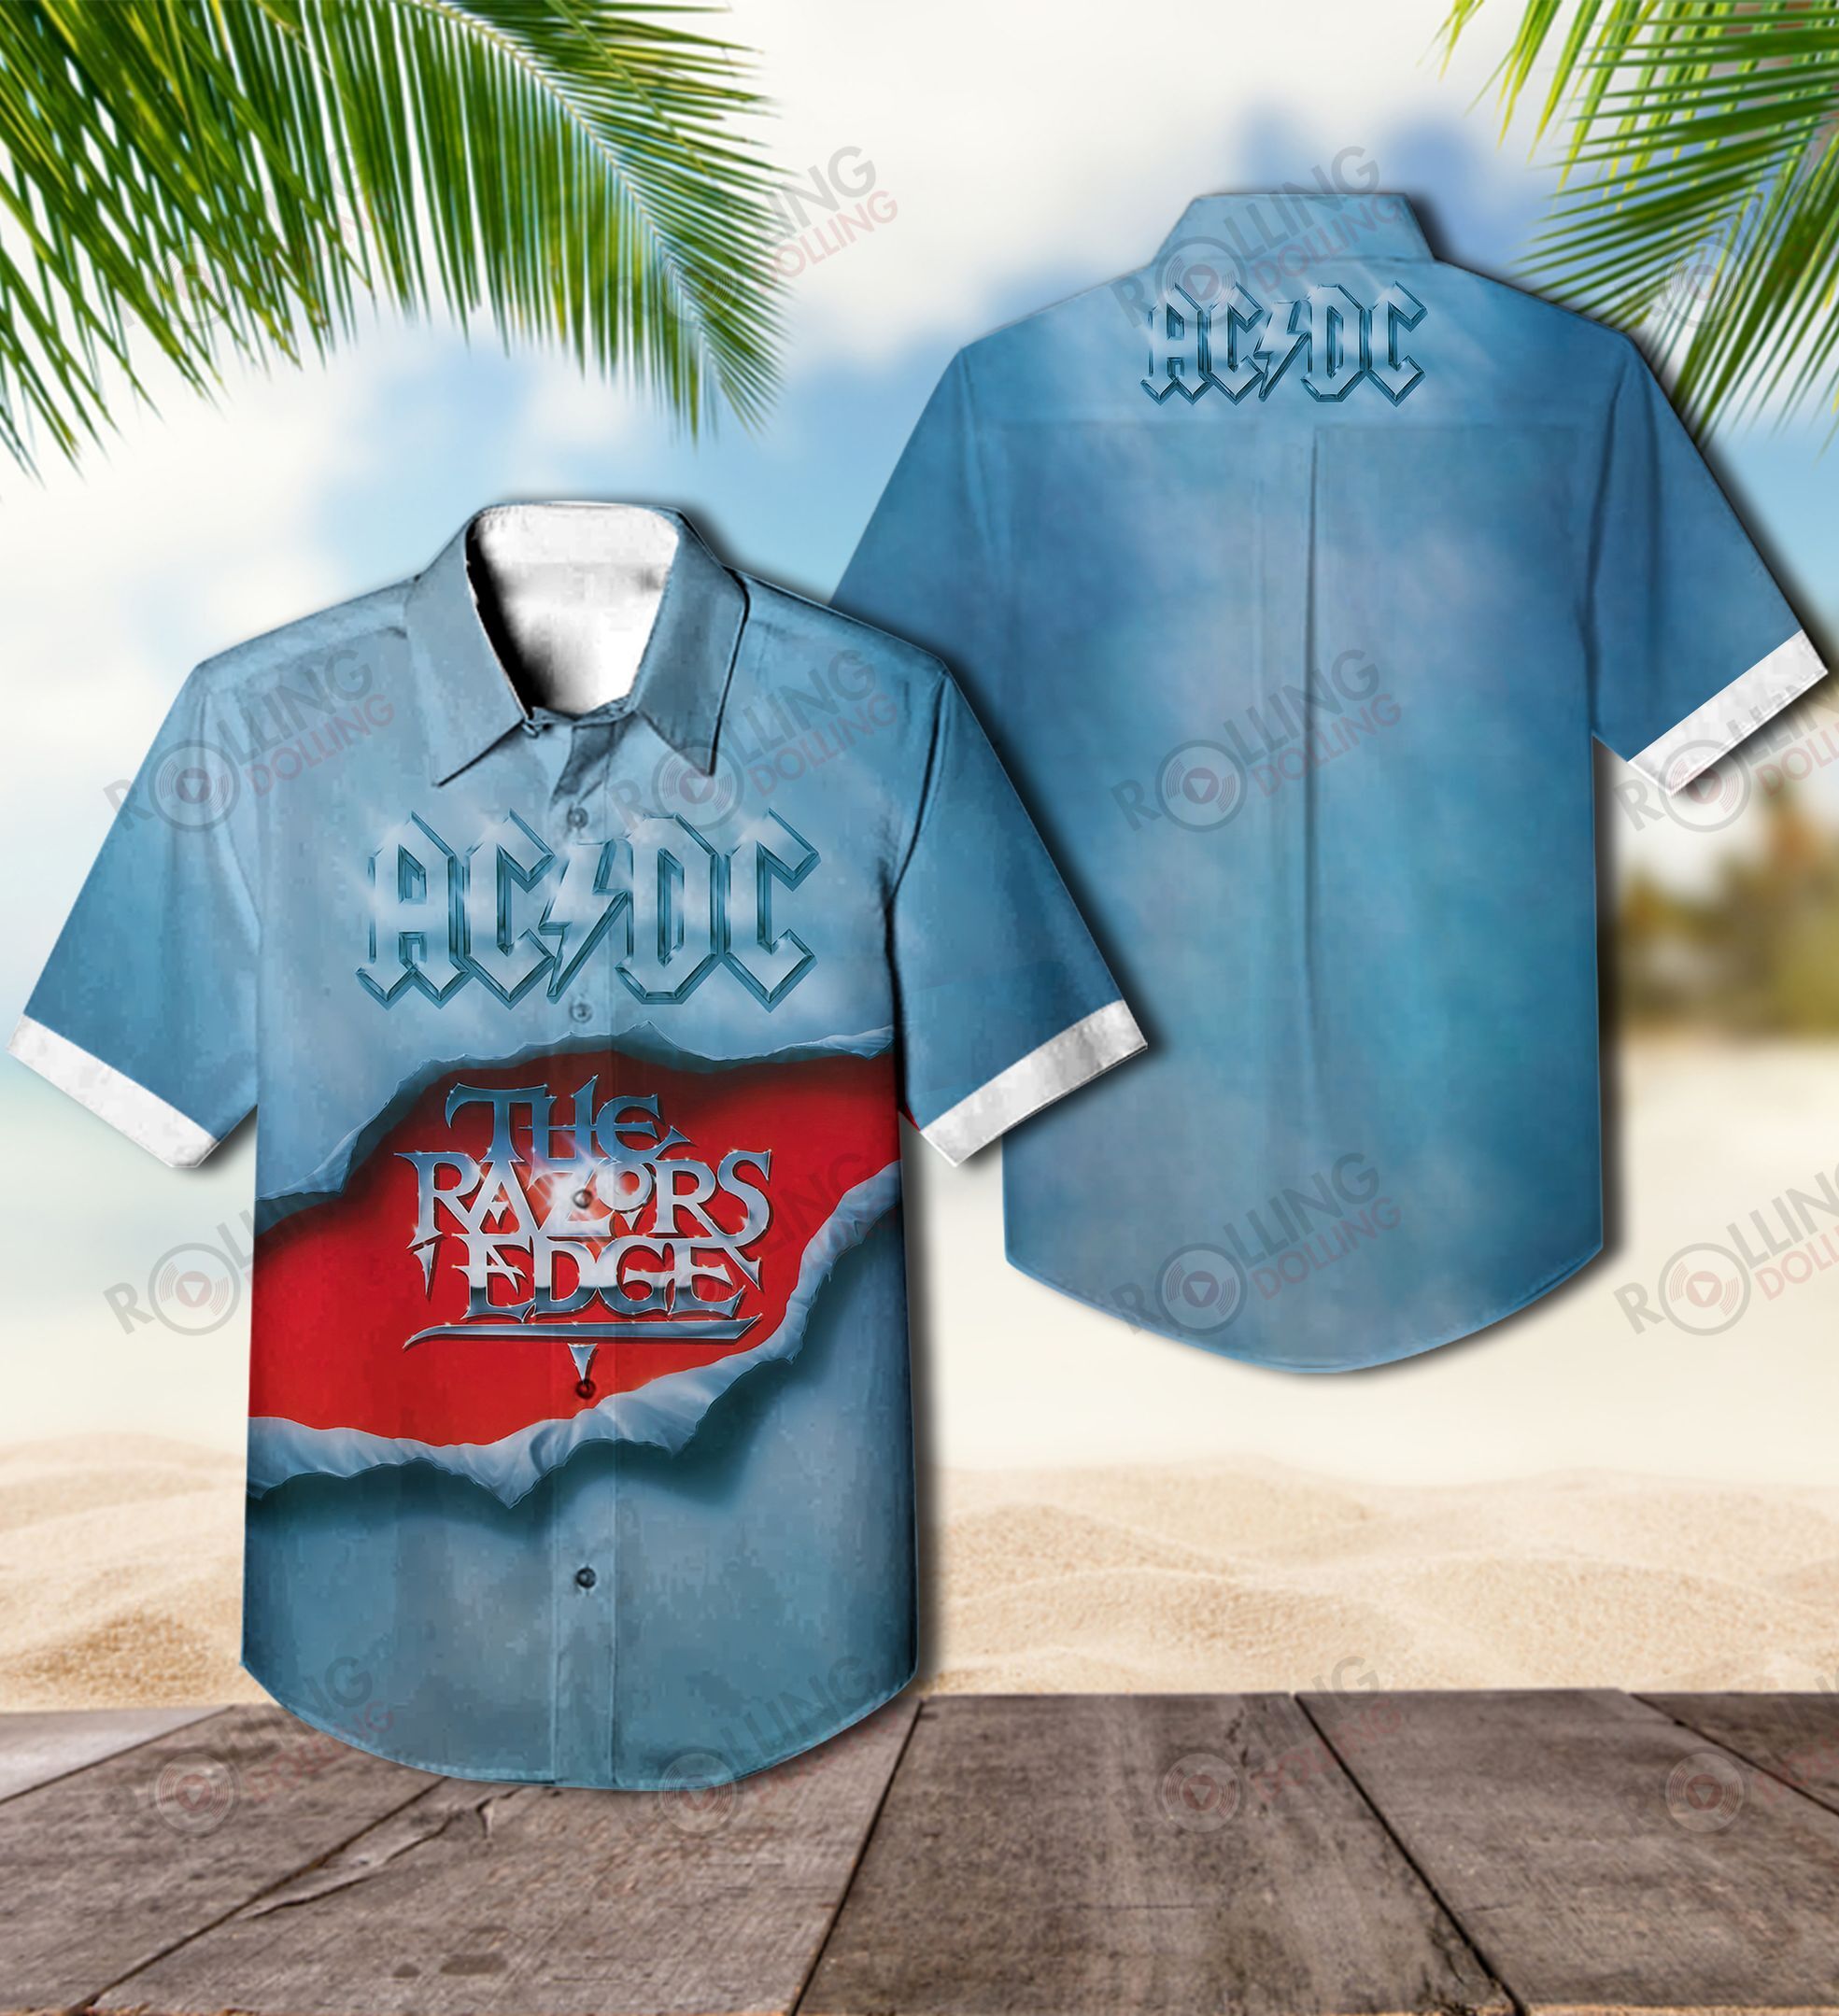 This would make a great gift for any fan who loves Hawaiian Shirt as well as Rock band 12